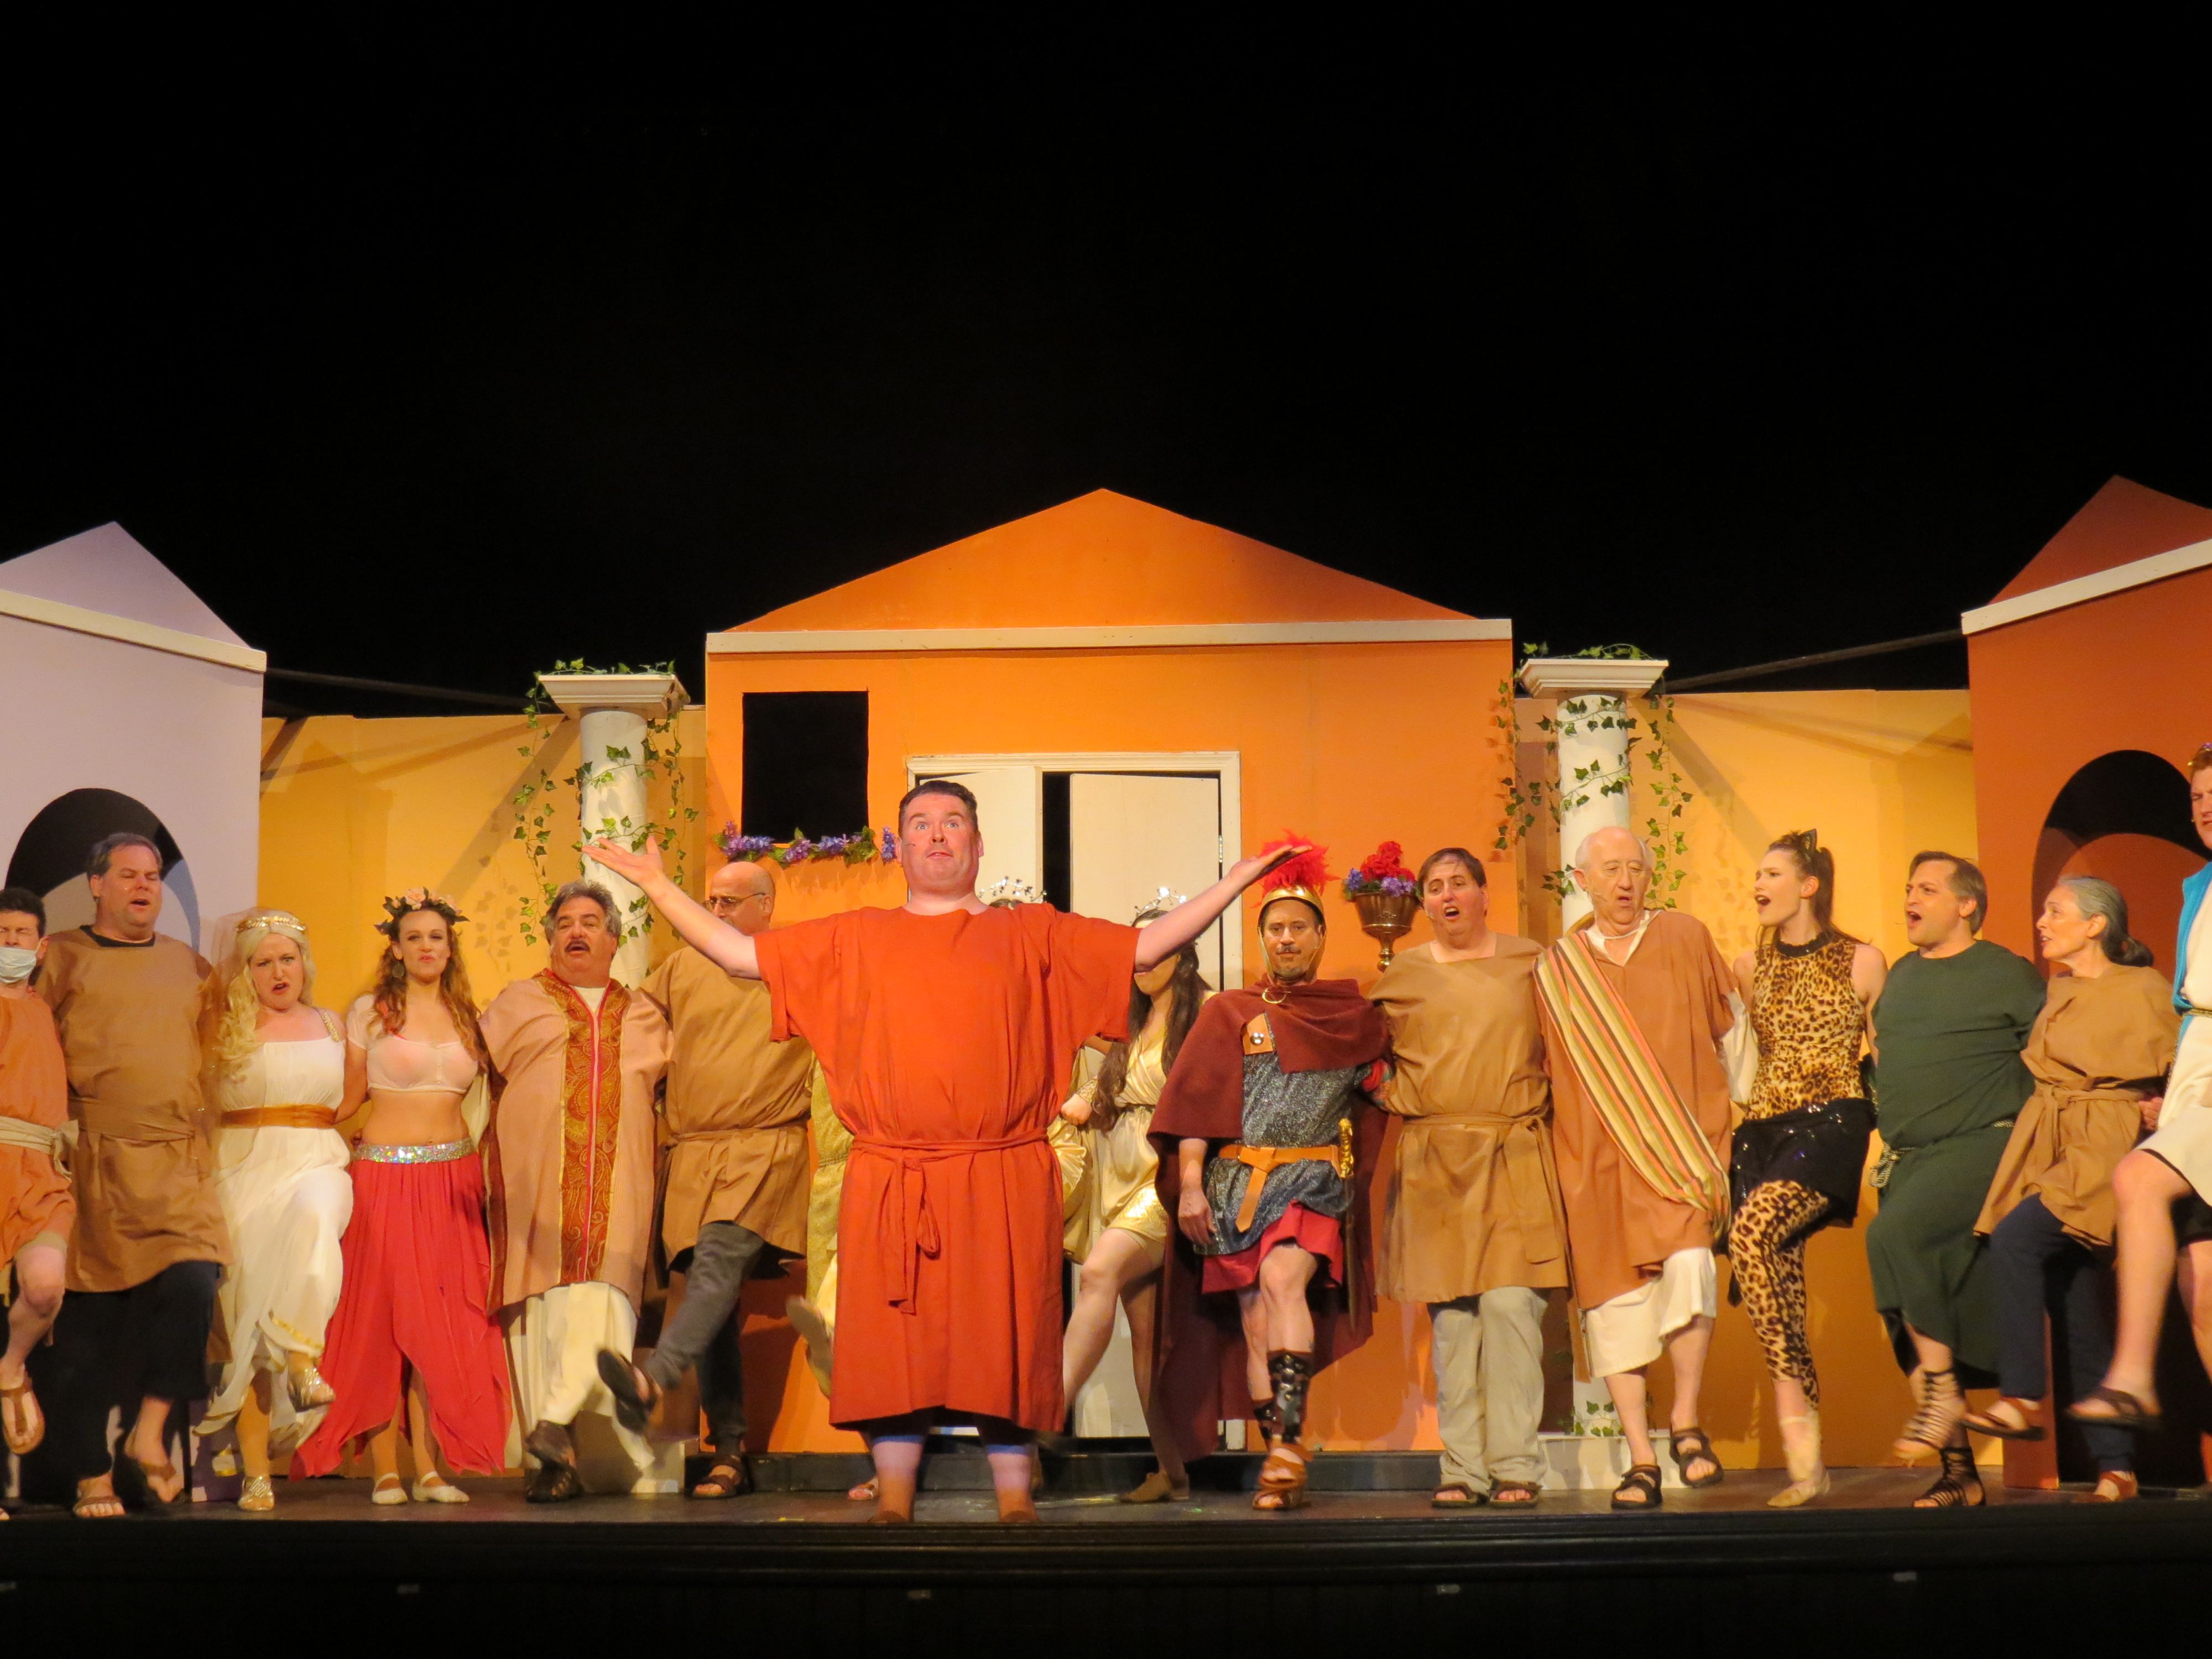 Archive – A Funny Thing Happened On The Way To The Forum